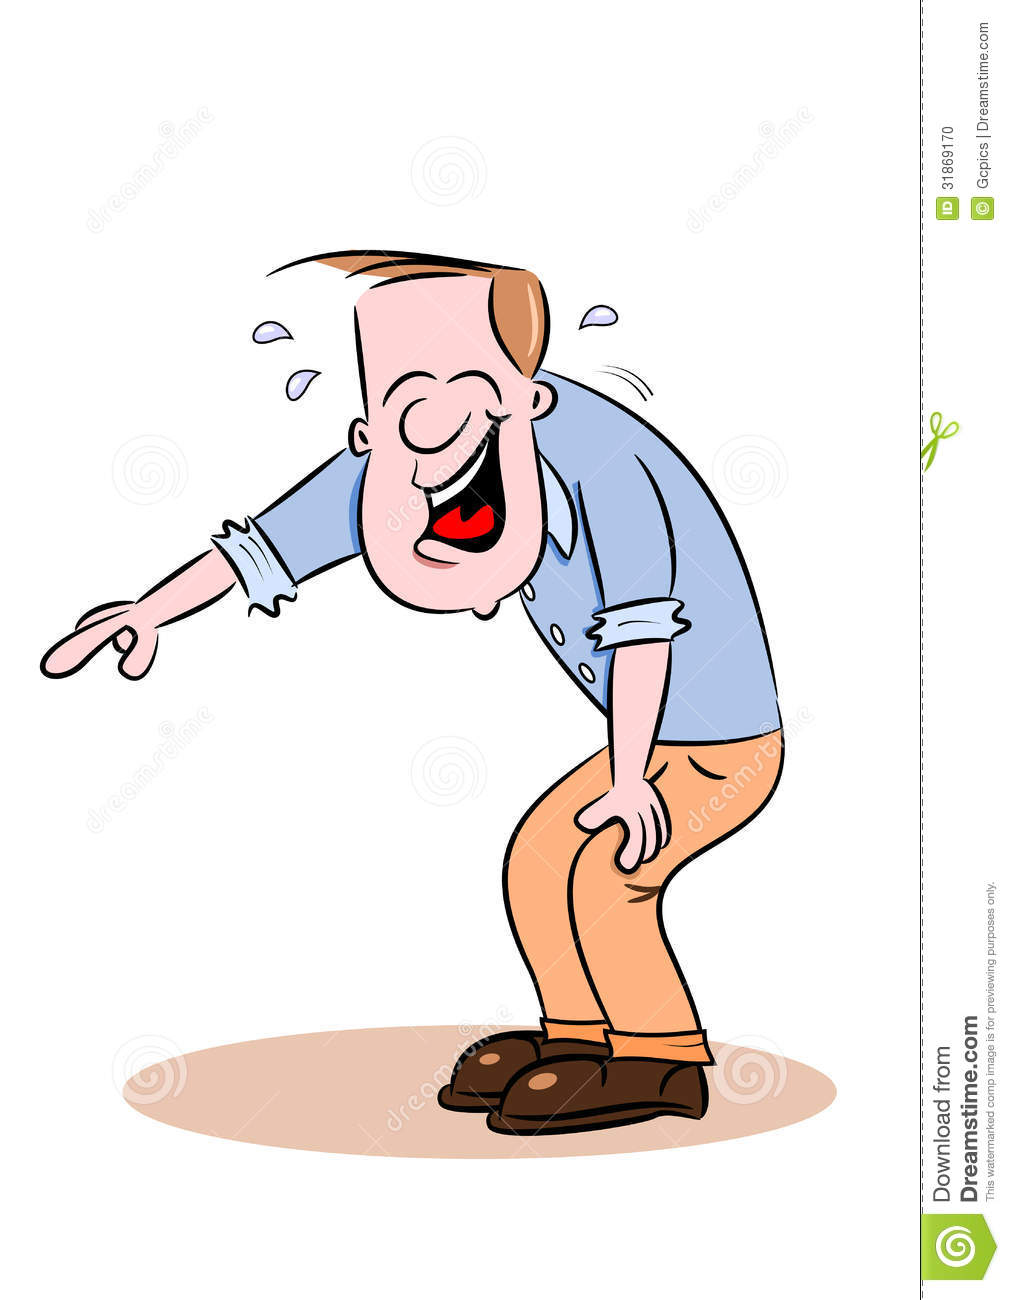 Cartoon Guy Laughing And Pointing Stock Photo - Image: 31869170